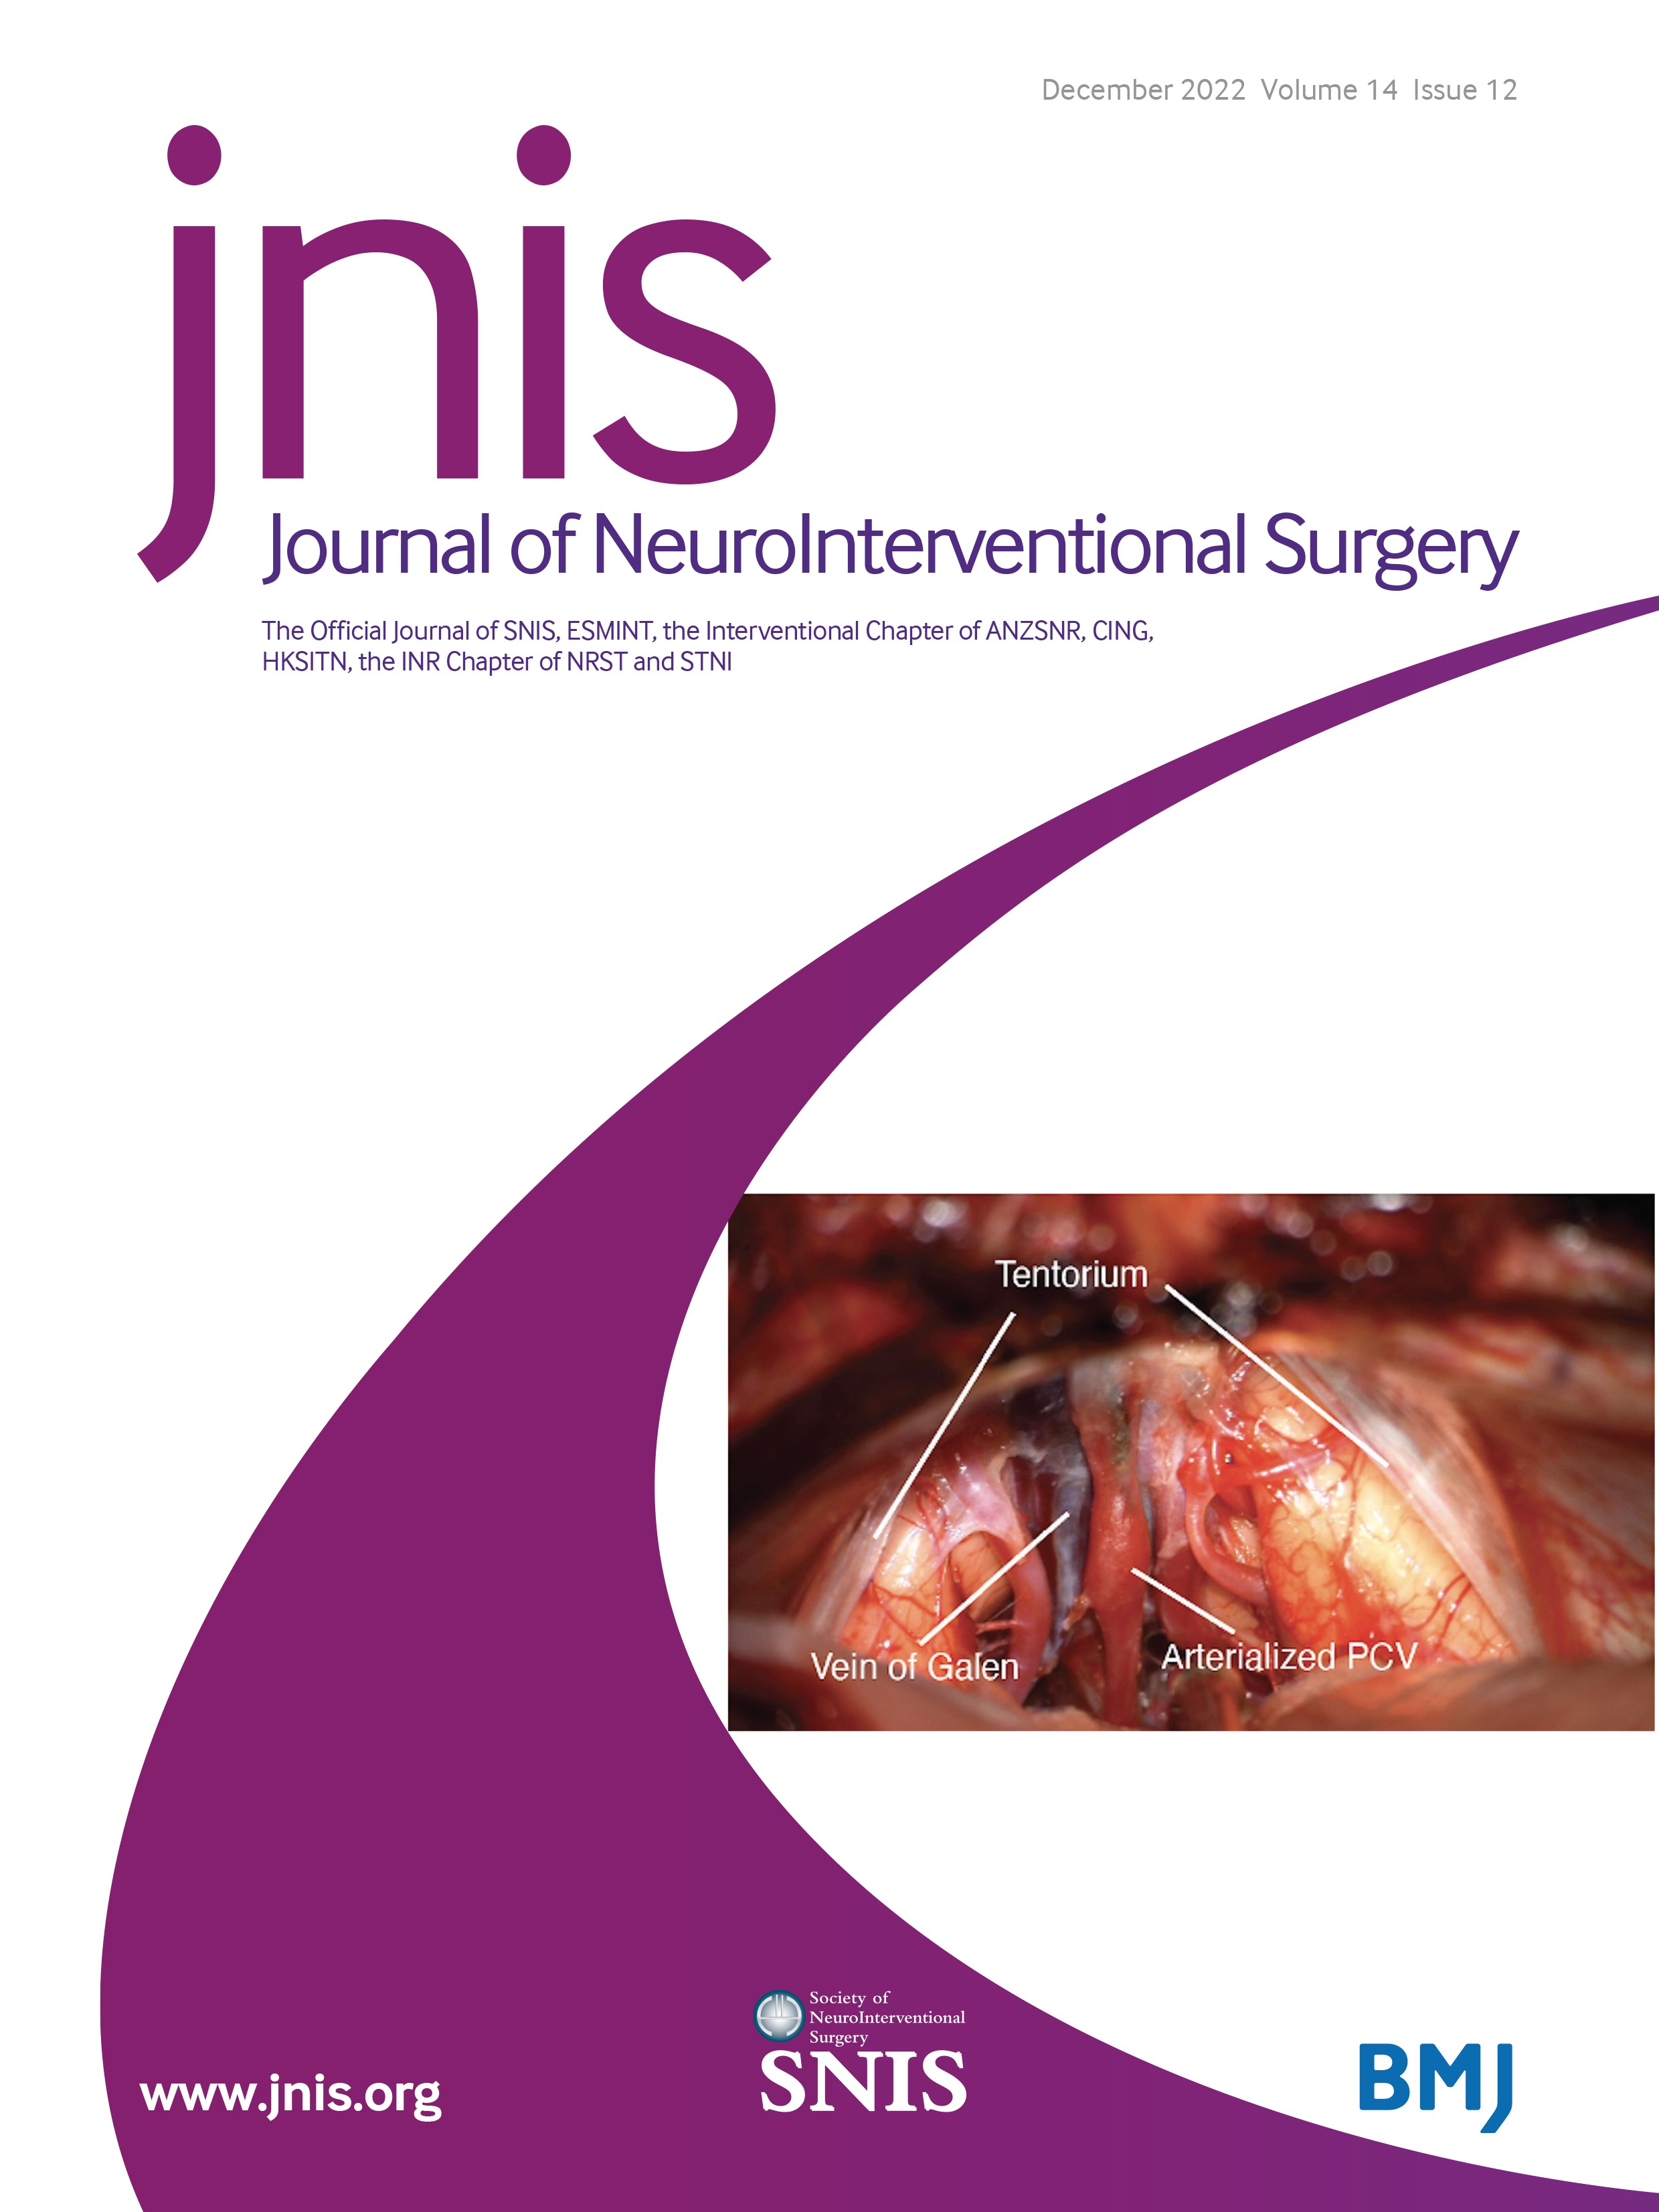 Effect of stroke etiology on endovascular thrombectomy with or without intravenous alteplase: a subgroup analysis of DIRECT-MT